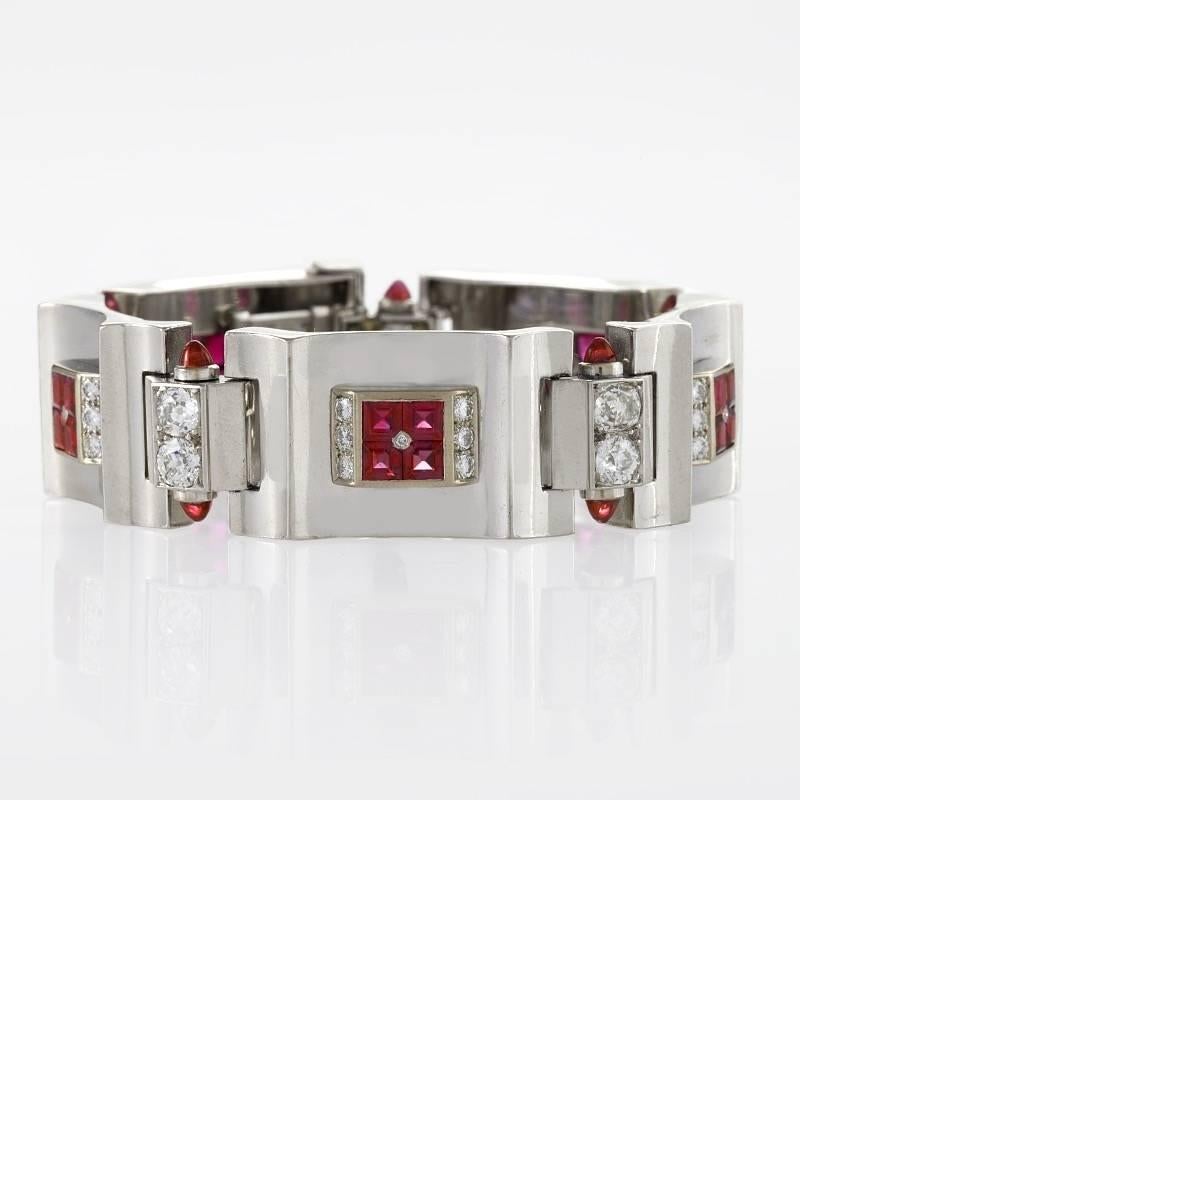 A French Art Deco polished platinum and 18 karat gold bracelet with rubies and diamonds. The bracelet has 20 square-cut rubies with an approximate total weight of 5.00 carats, 10 cabochon rubies with an approximate total weight of 1.00 carat, and 45